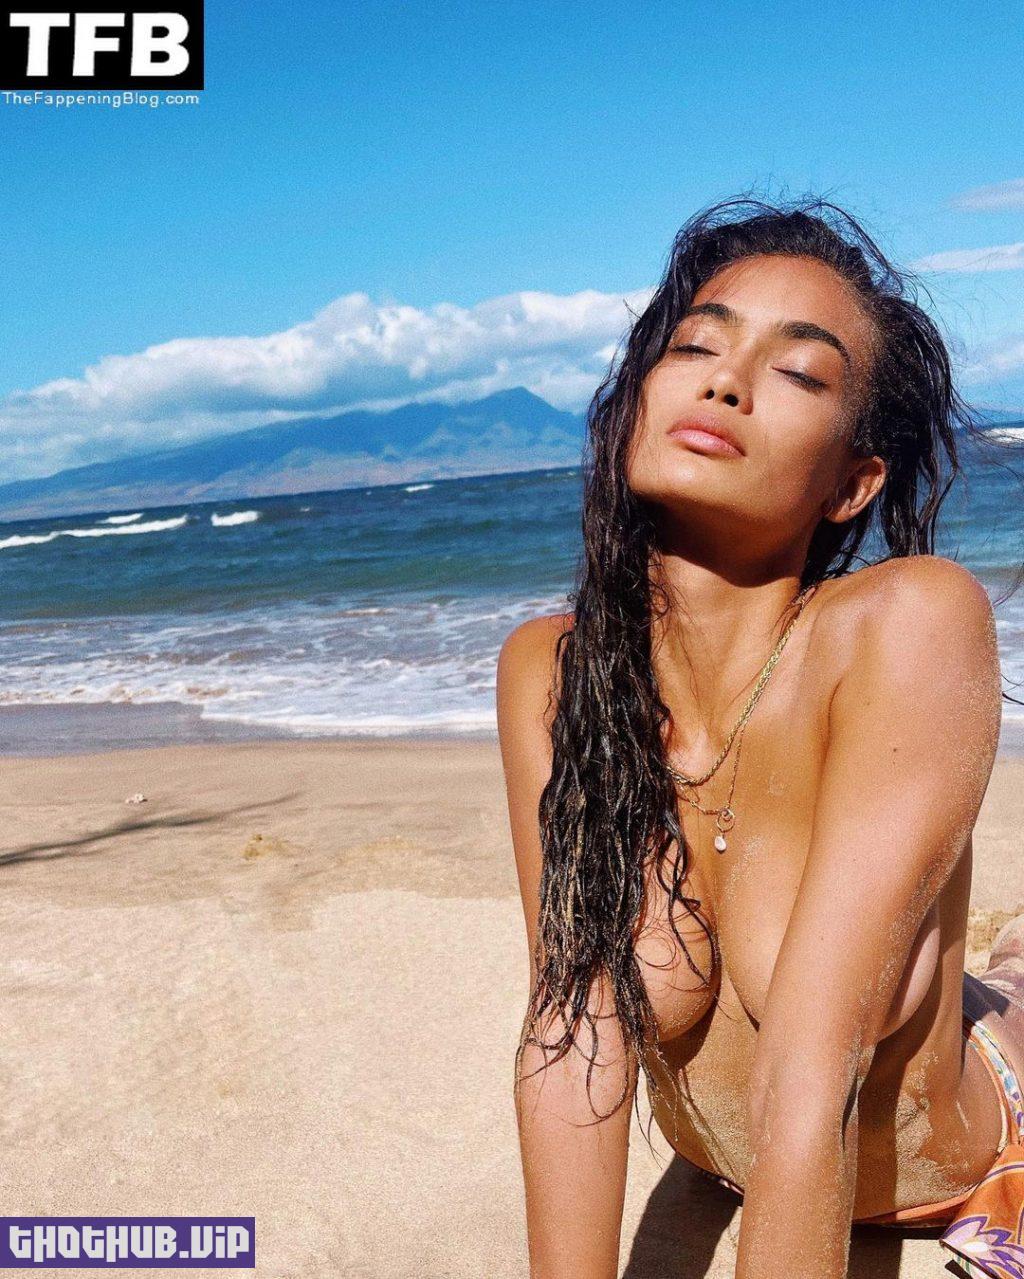 Kelly Gale Topless The Fappening Blog 1